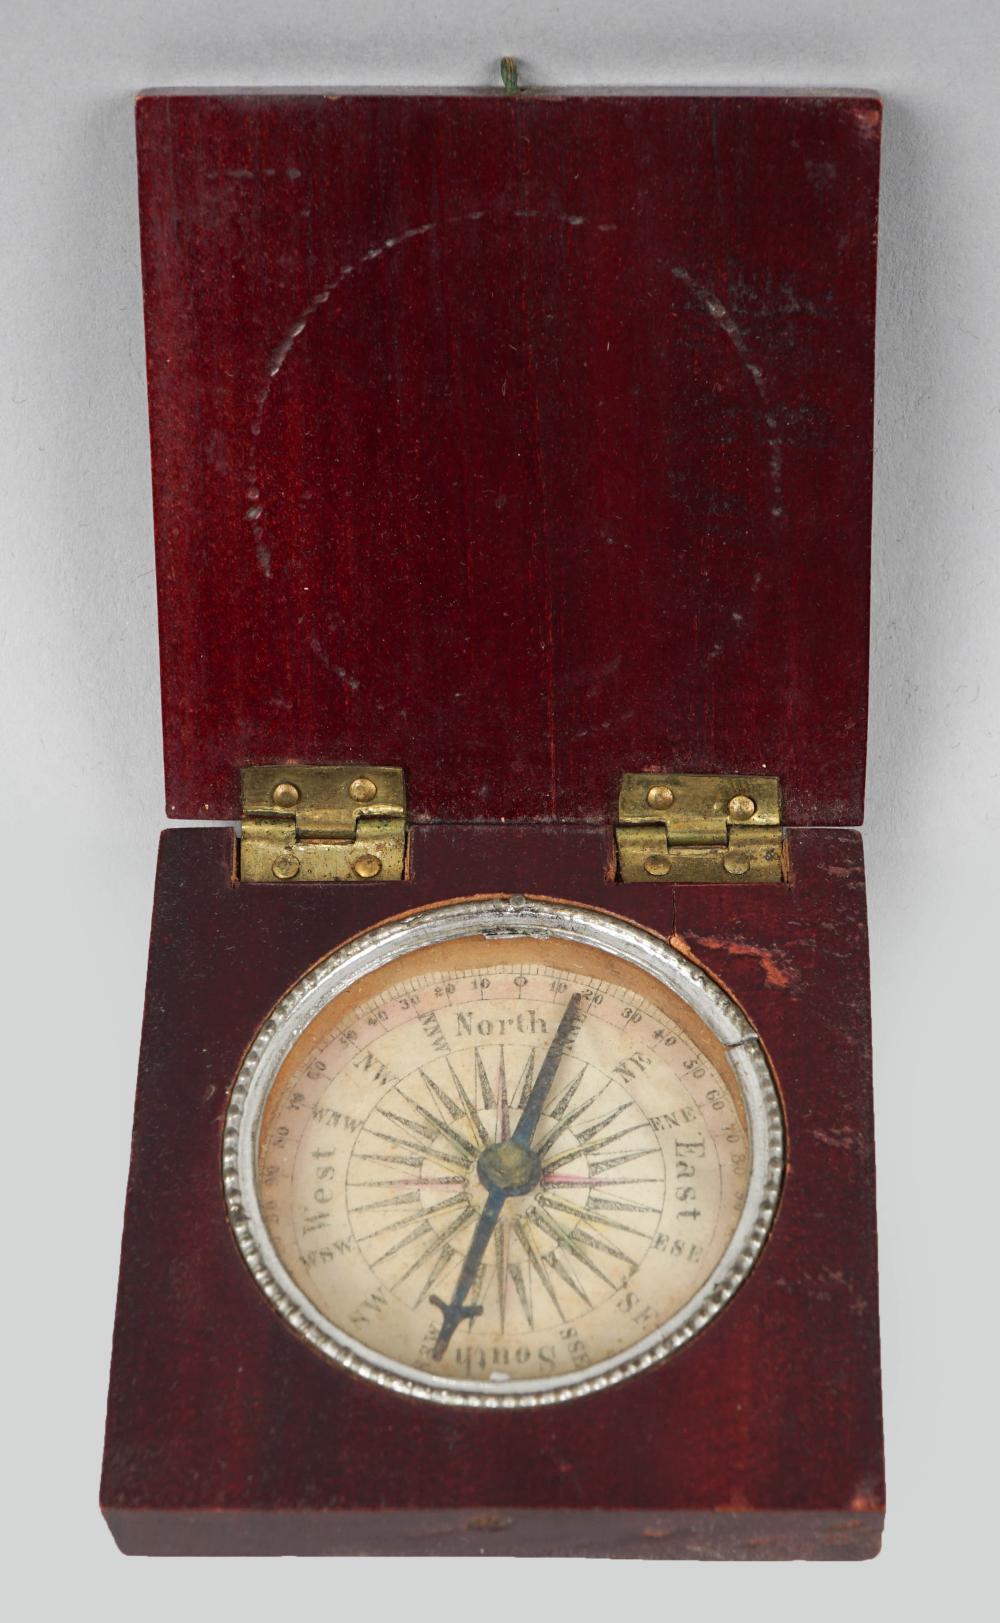 COMPASS IN WOOD BOX PURPORTEDLY 33c57a